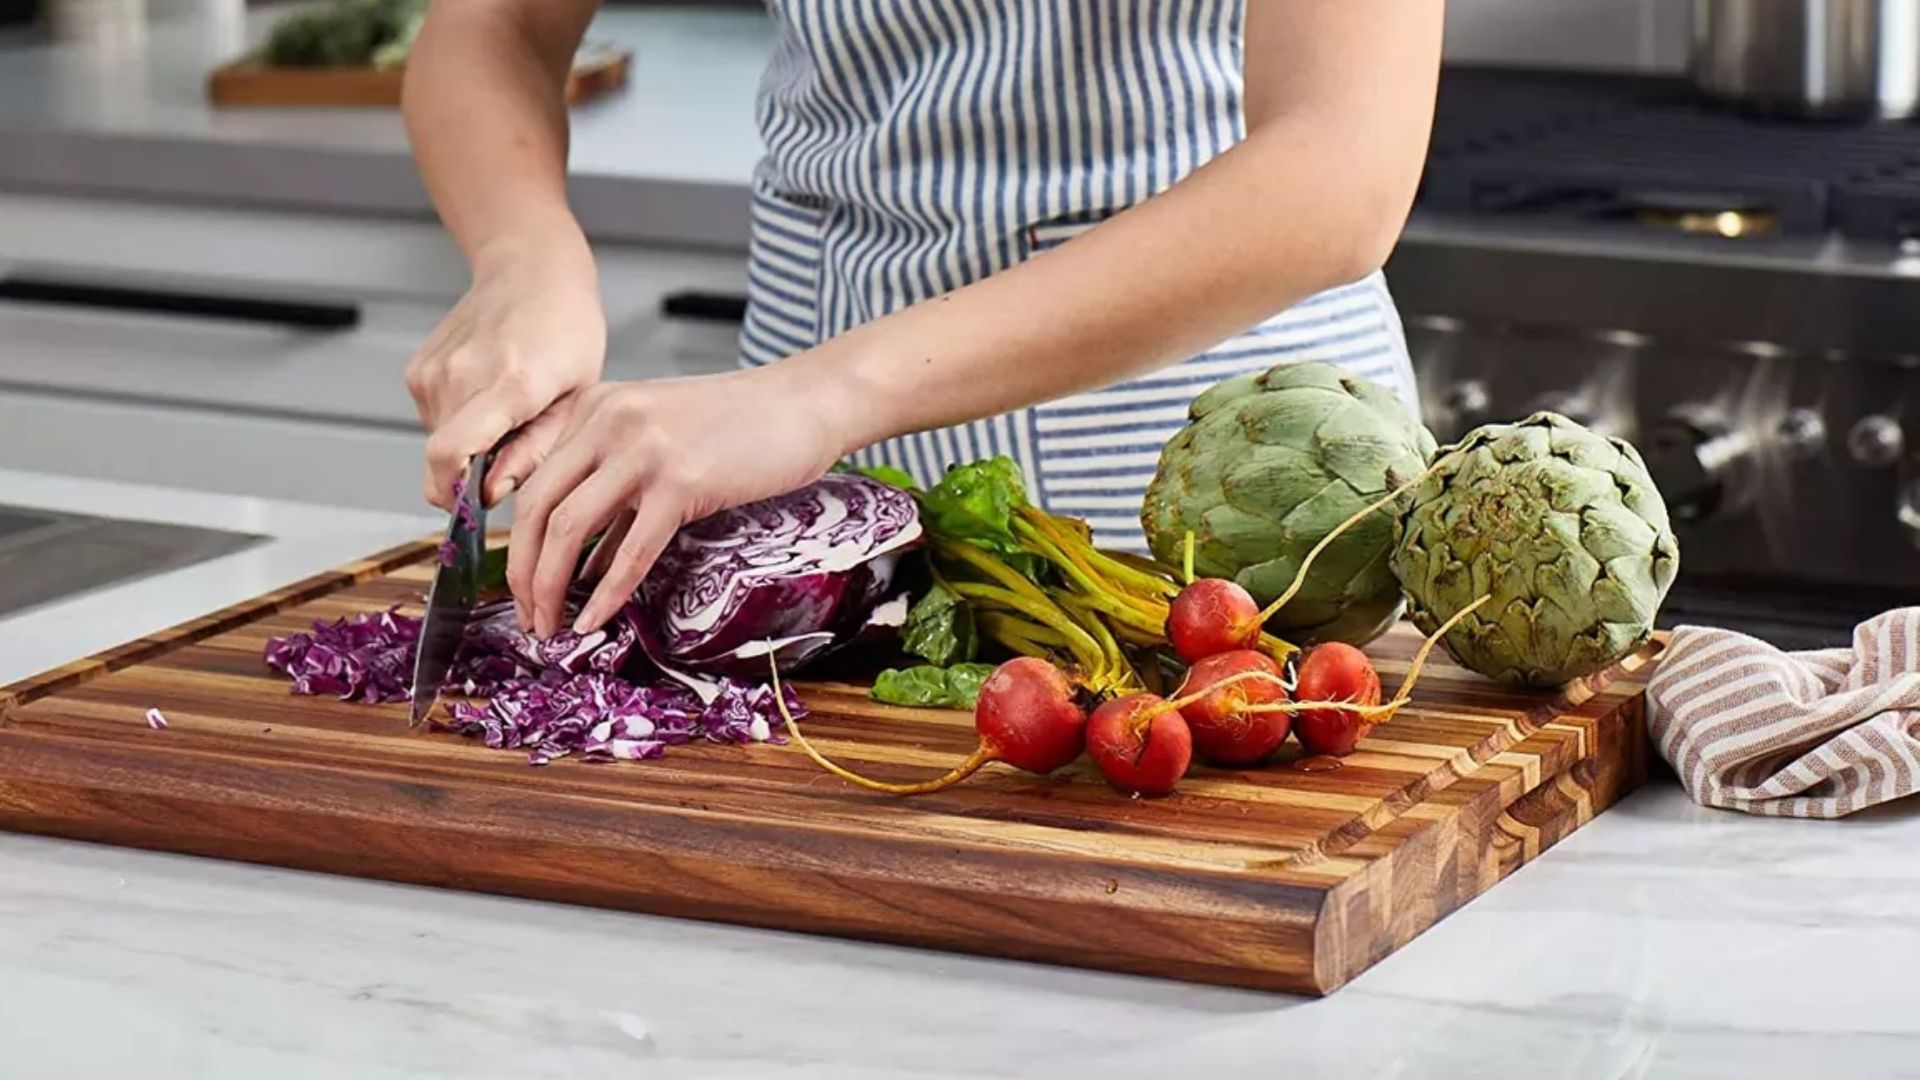 The 8 Best Cutting Boards in 2023, According to Experts